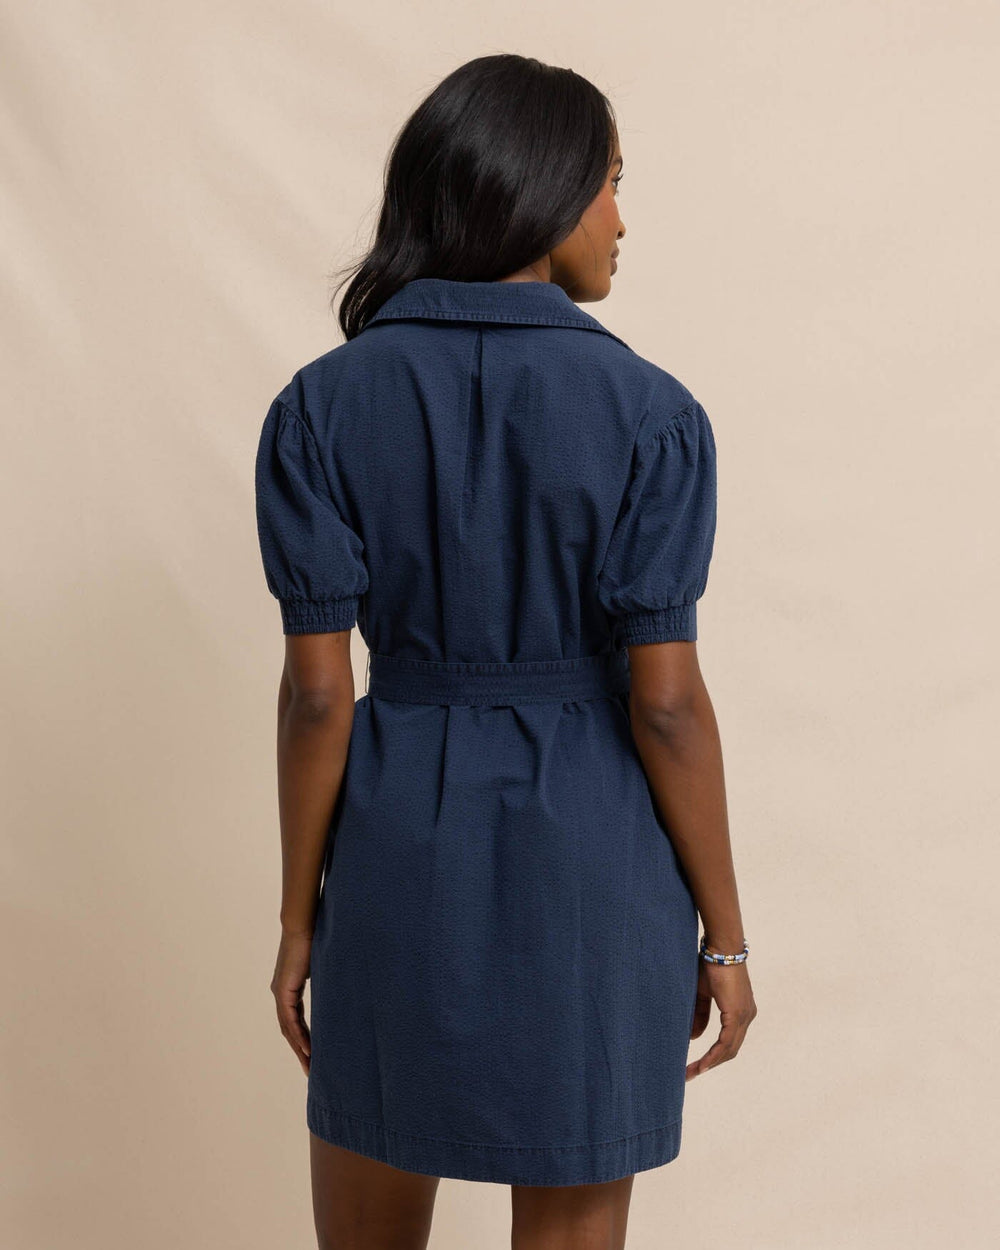 The back view of the Southern Tide Calan Washed Seersucker Dress by Southern Tide - Dress Blue